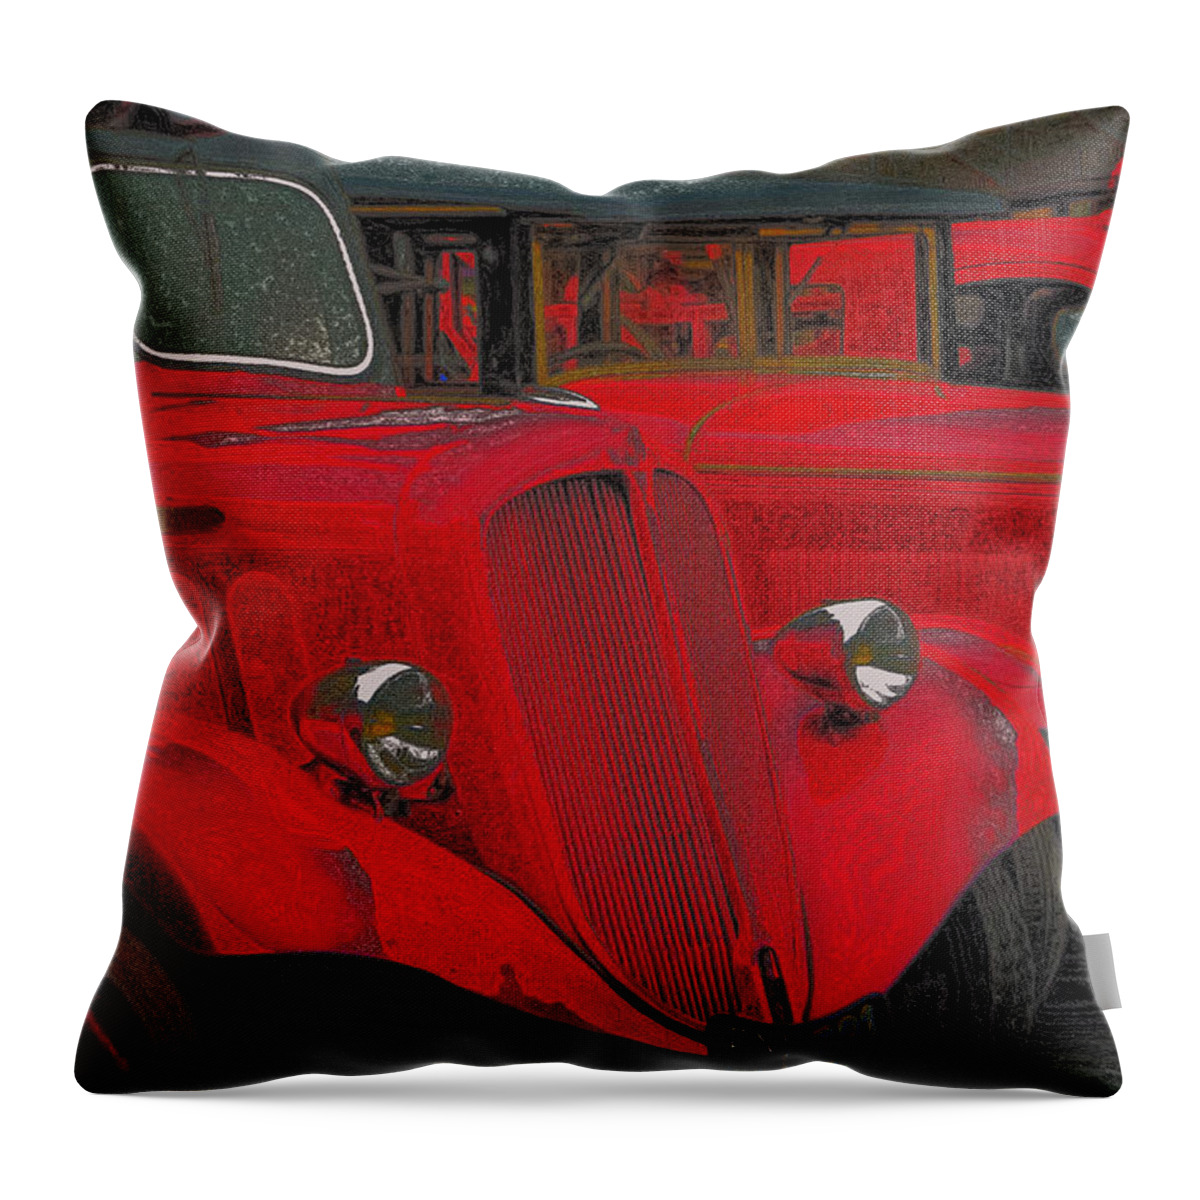 Delahaye Truck Throw Pillow featuring the digital art Vintage Fire Truck Techno Art by Tony Grider